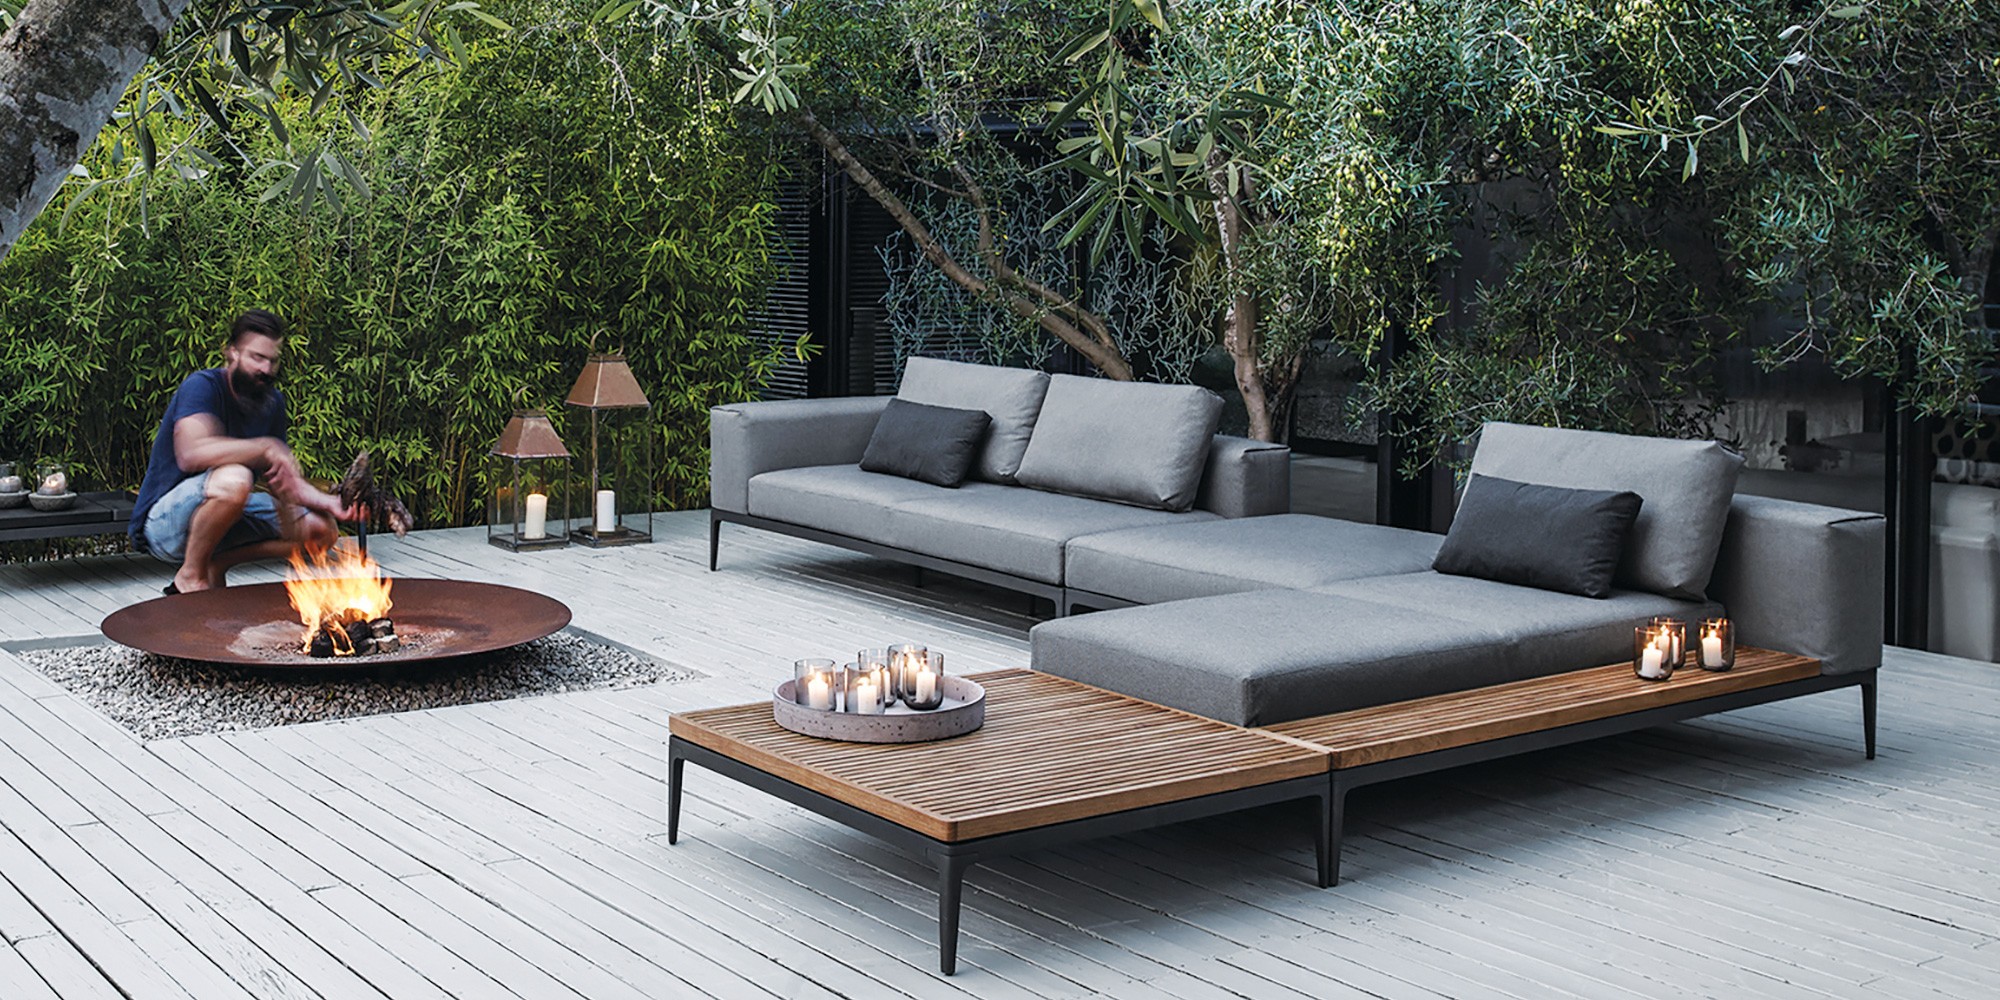 Modern outdoor furniture down to earth living